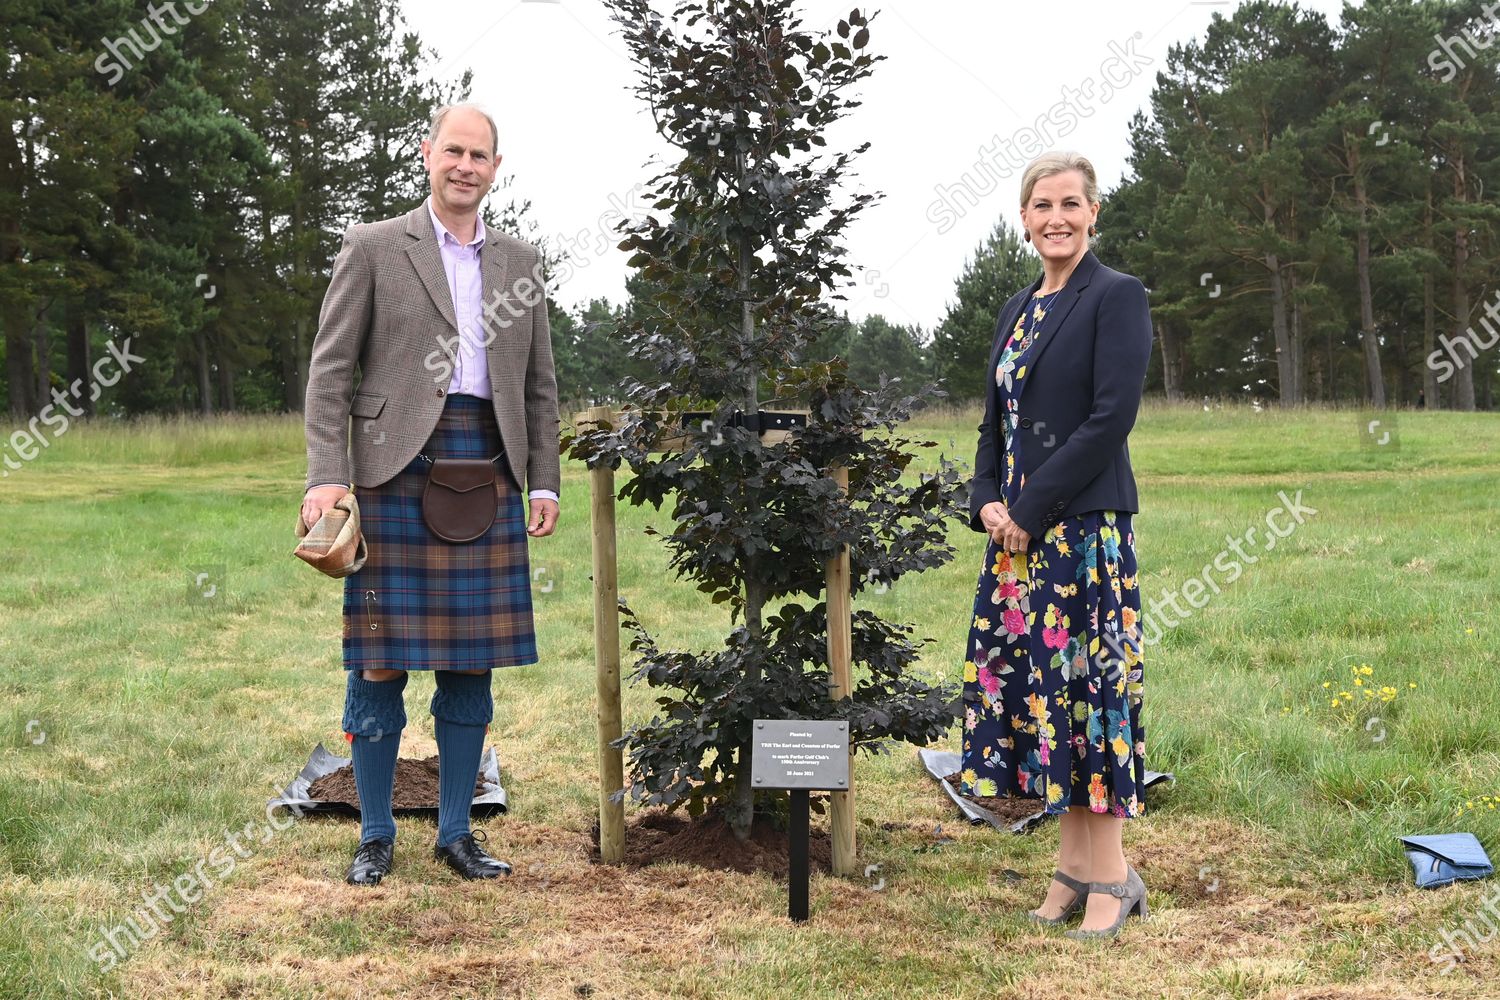 CASA REAL BRITÁNICA - Página 76 Prince-edward-and-sophie-countess-of-wessex-visit-to-forfar-golf-club-scotland-uk-shutterstock-editorial-12172307q